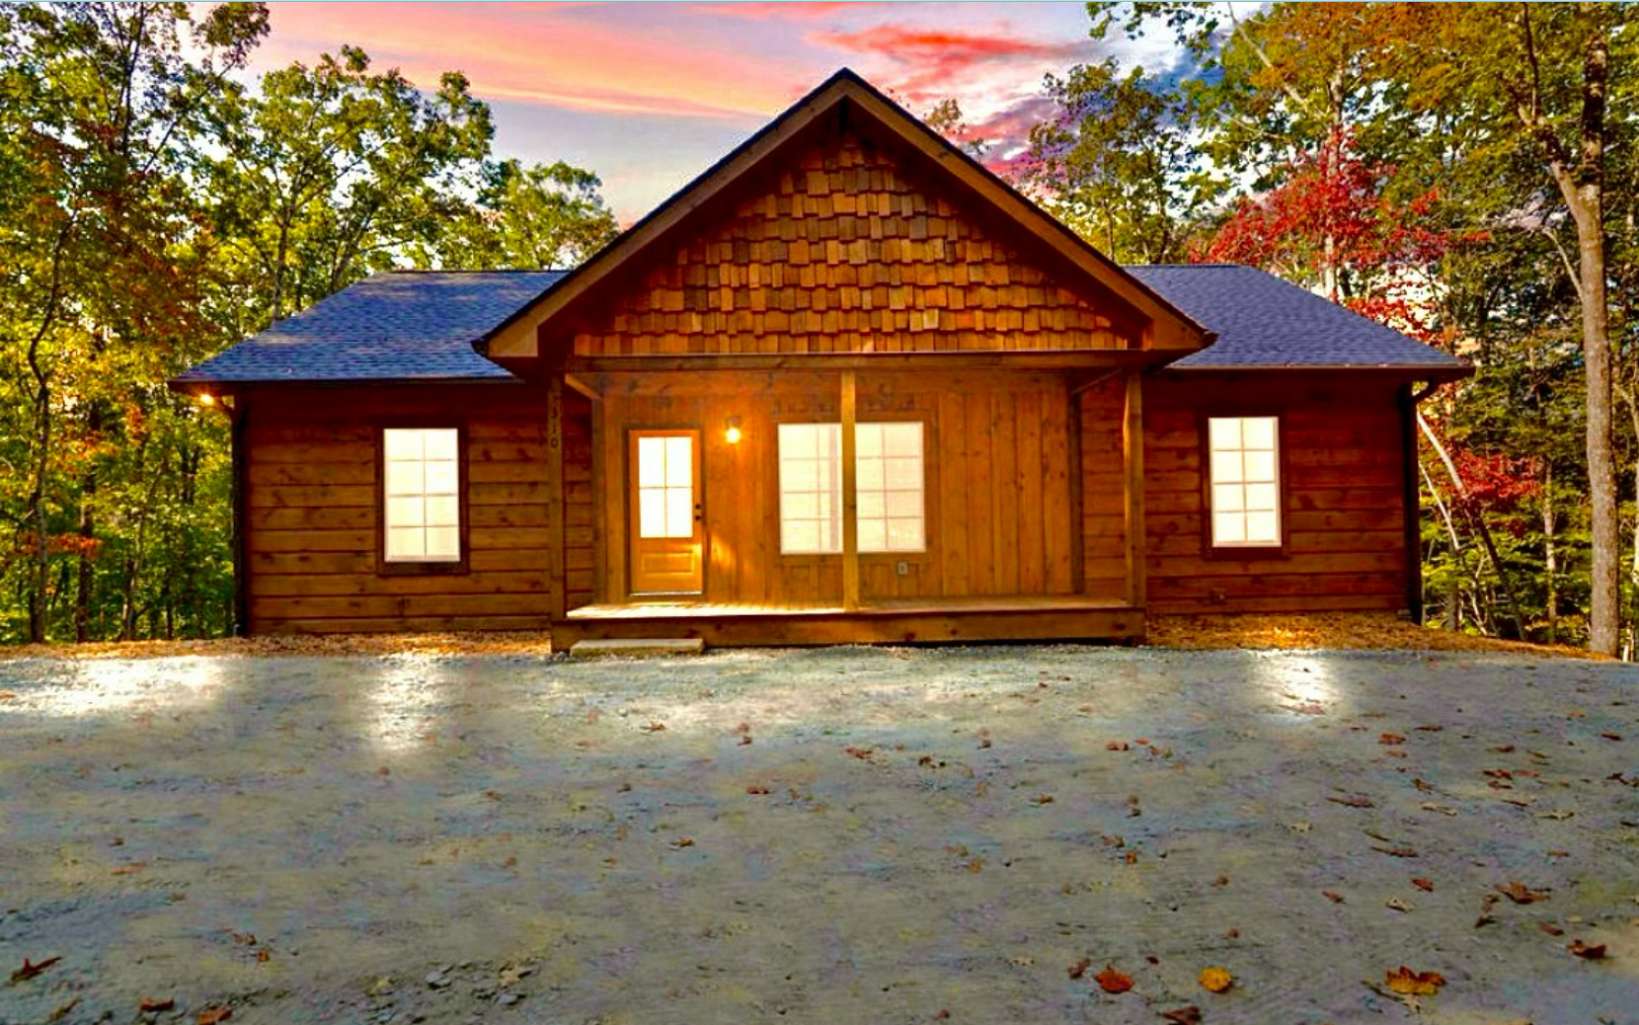 Pre-Construction Escape to the tranquil allure of mountain living at 89 Monitor Drive! This inviting cabin is situated on 1.32-acres, offering 3 bedrooms & 2 baths the ultimate mountain retreat! This home will be complete in 4-5 months, so get in on it now to choose the finishing touches! Adorned with rustic chink log siding & charming finishes, it exudes a cozy inviting atmosphere that will capture your heart. Wonder inside to find a dreamy kitchen with SS appliances, a large kitchen island, custom wood cabinets & granite countertops. Open concept with a view to the large living room with tongue & groove ceilings, stacked stone gas log fireplace & a large area for many memories to be made! For the luxury, the master suite features tongue & groove ceilings, a large walk-in closet with a trendy barn door everyone will love & a large closet with shelving system to stay organized! The master bathroom was meticulously designed with his & hers sinks, walk-in large tile shower granite countertops. Step onto the screened in back porch & experience the serenity of the outdoors, with a delightful rock stone fireplace & a welcoming seating area for relaxation. Cable TV, high-speed internet, county water, excellent cell service! Located in the highly desired Coosawattee river resort with many amenities such as pools, tennis courts, access to the Coosawattee River, hiking trails, parks, exercise facility & more! Perfect for full time living, part time living, or vacation rental/STR!